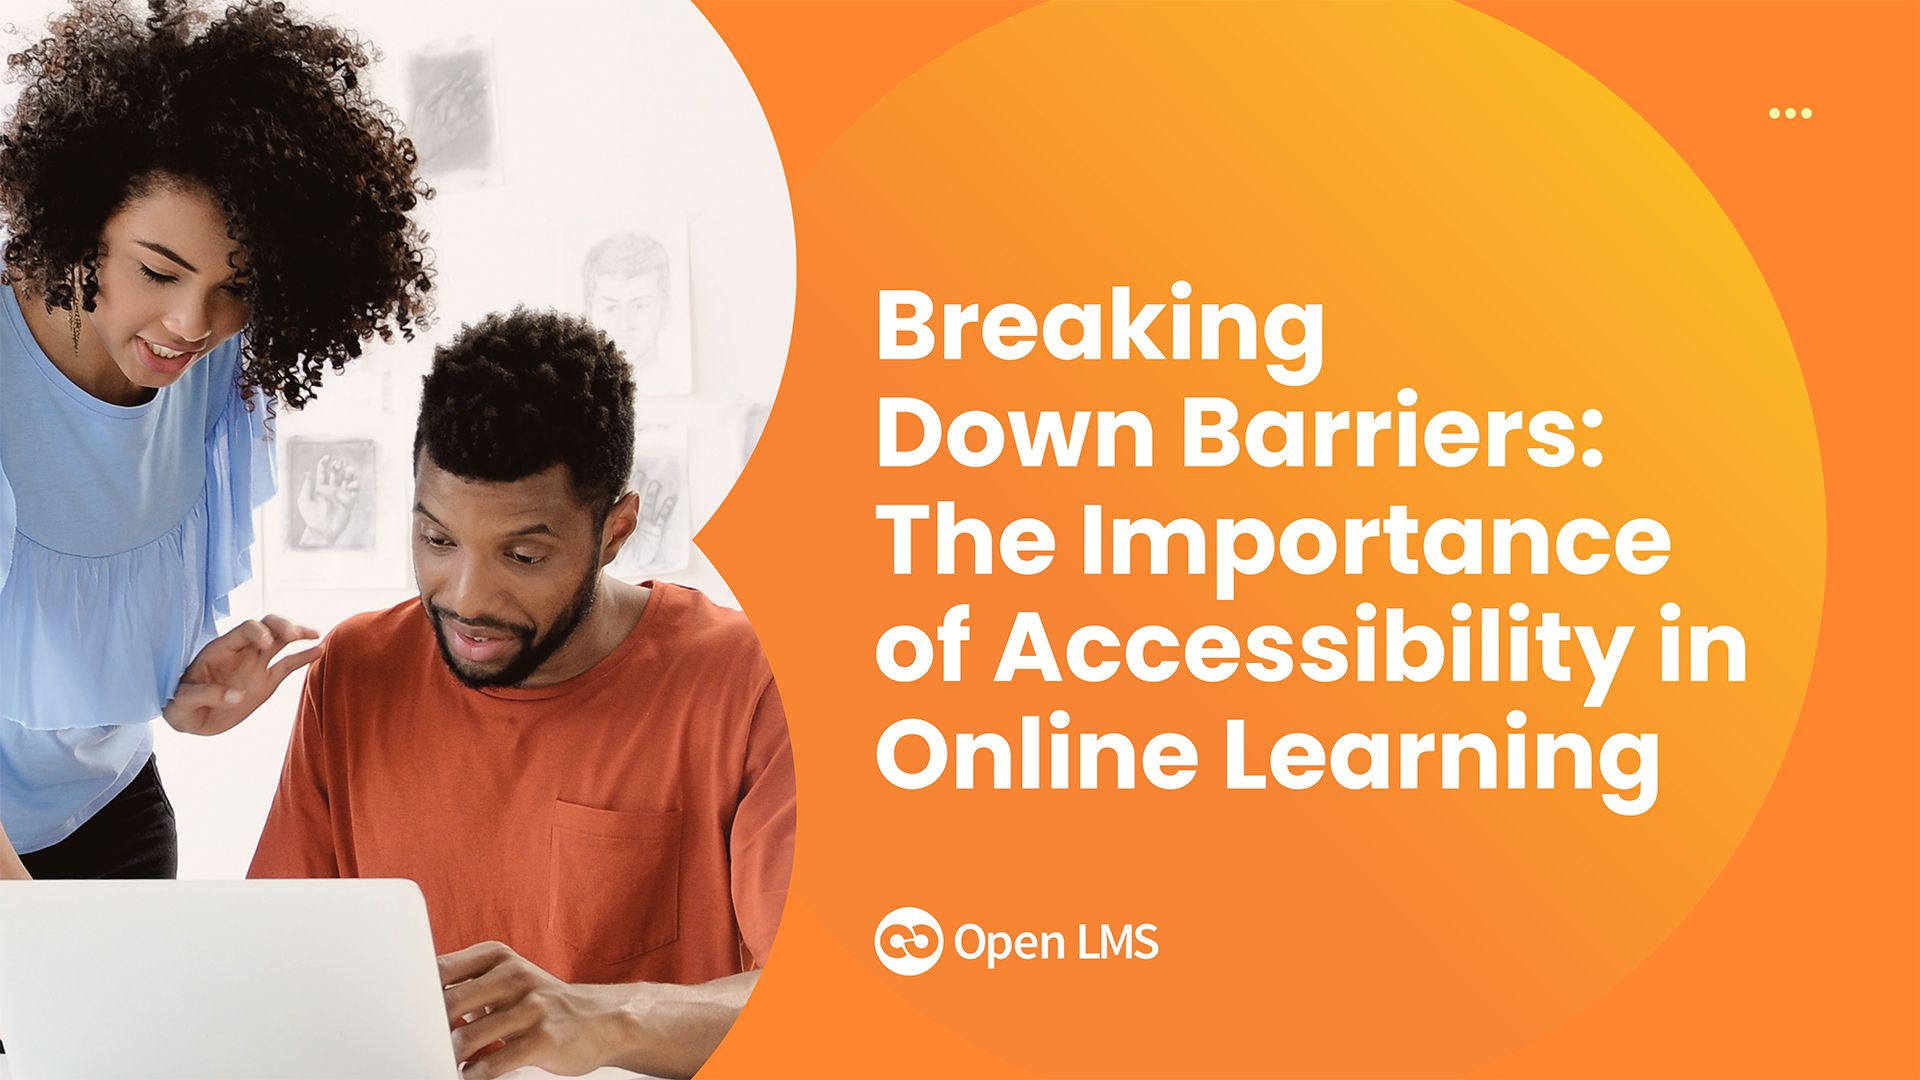 Breaking Down Barriers: The Importance of Accessibility in Online Learning